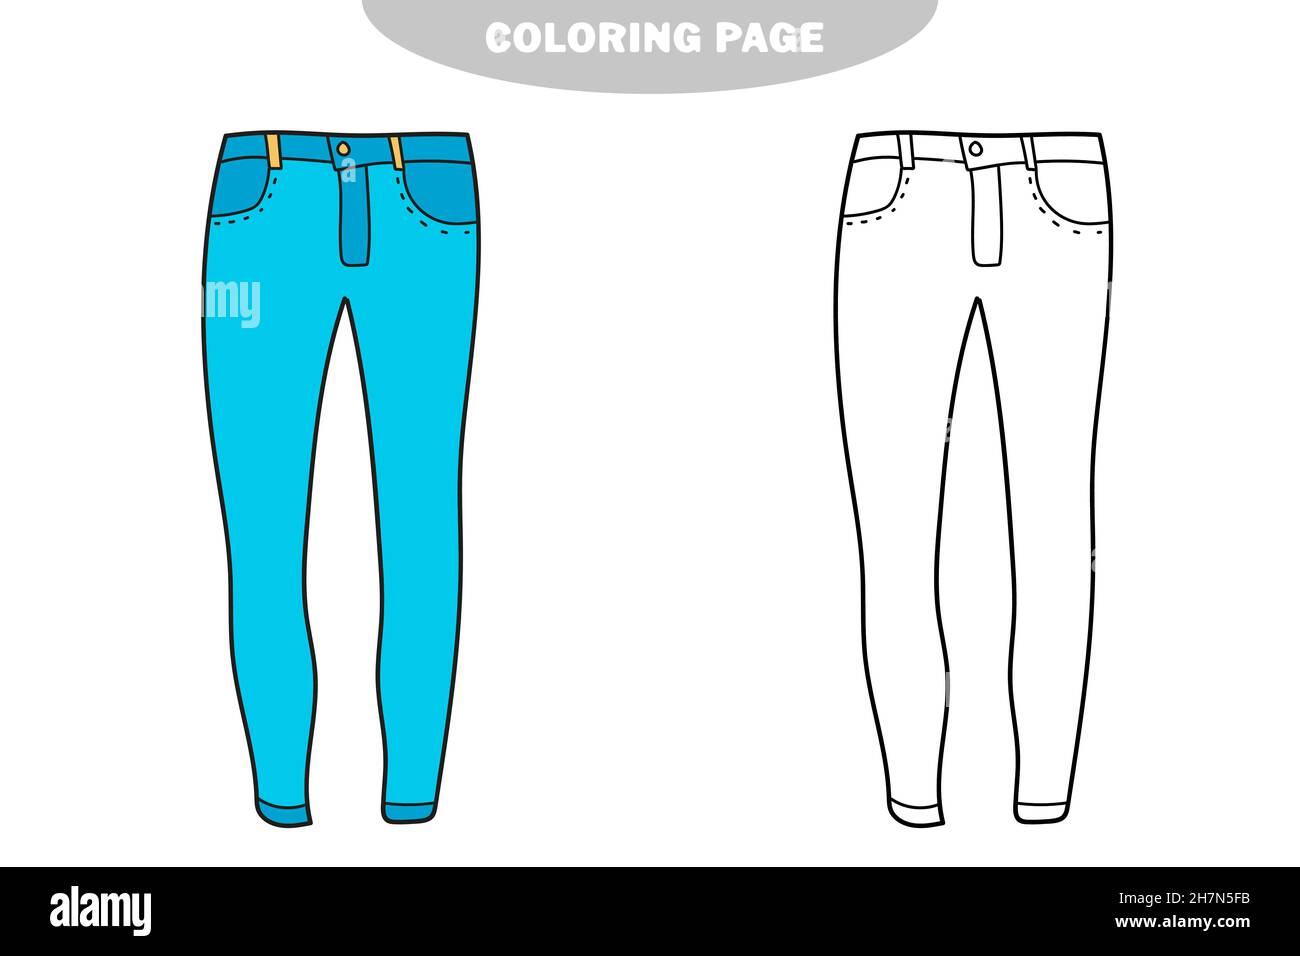 Pants trousers coloring pages  Download Free Pants trousers coloring pages  for kids  Best Coloring Pages